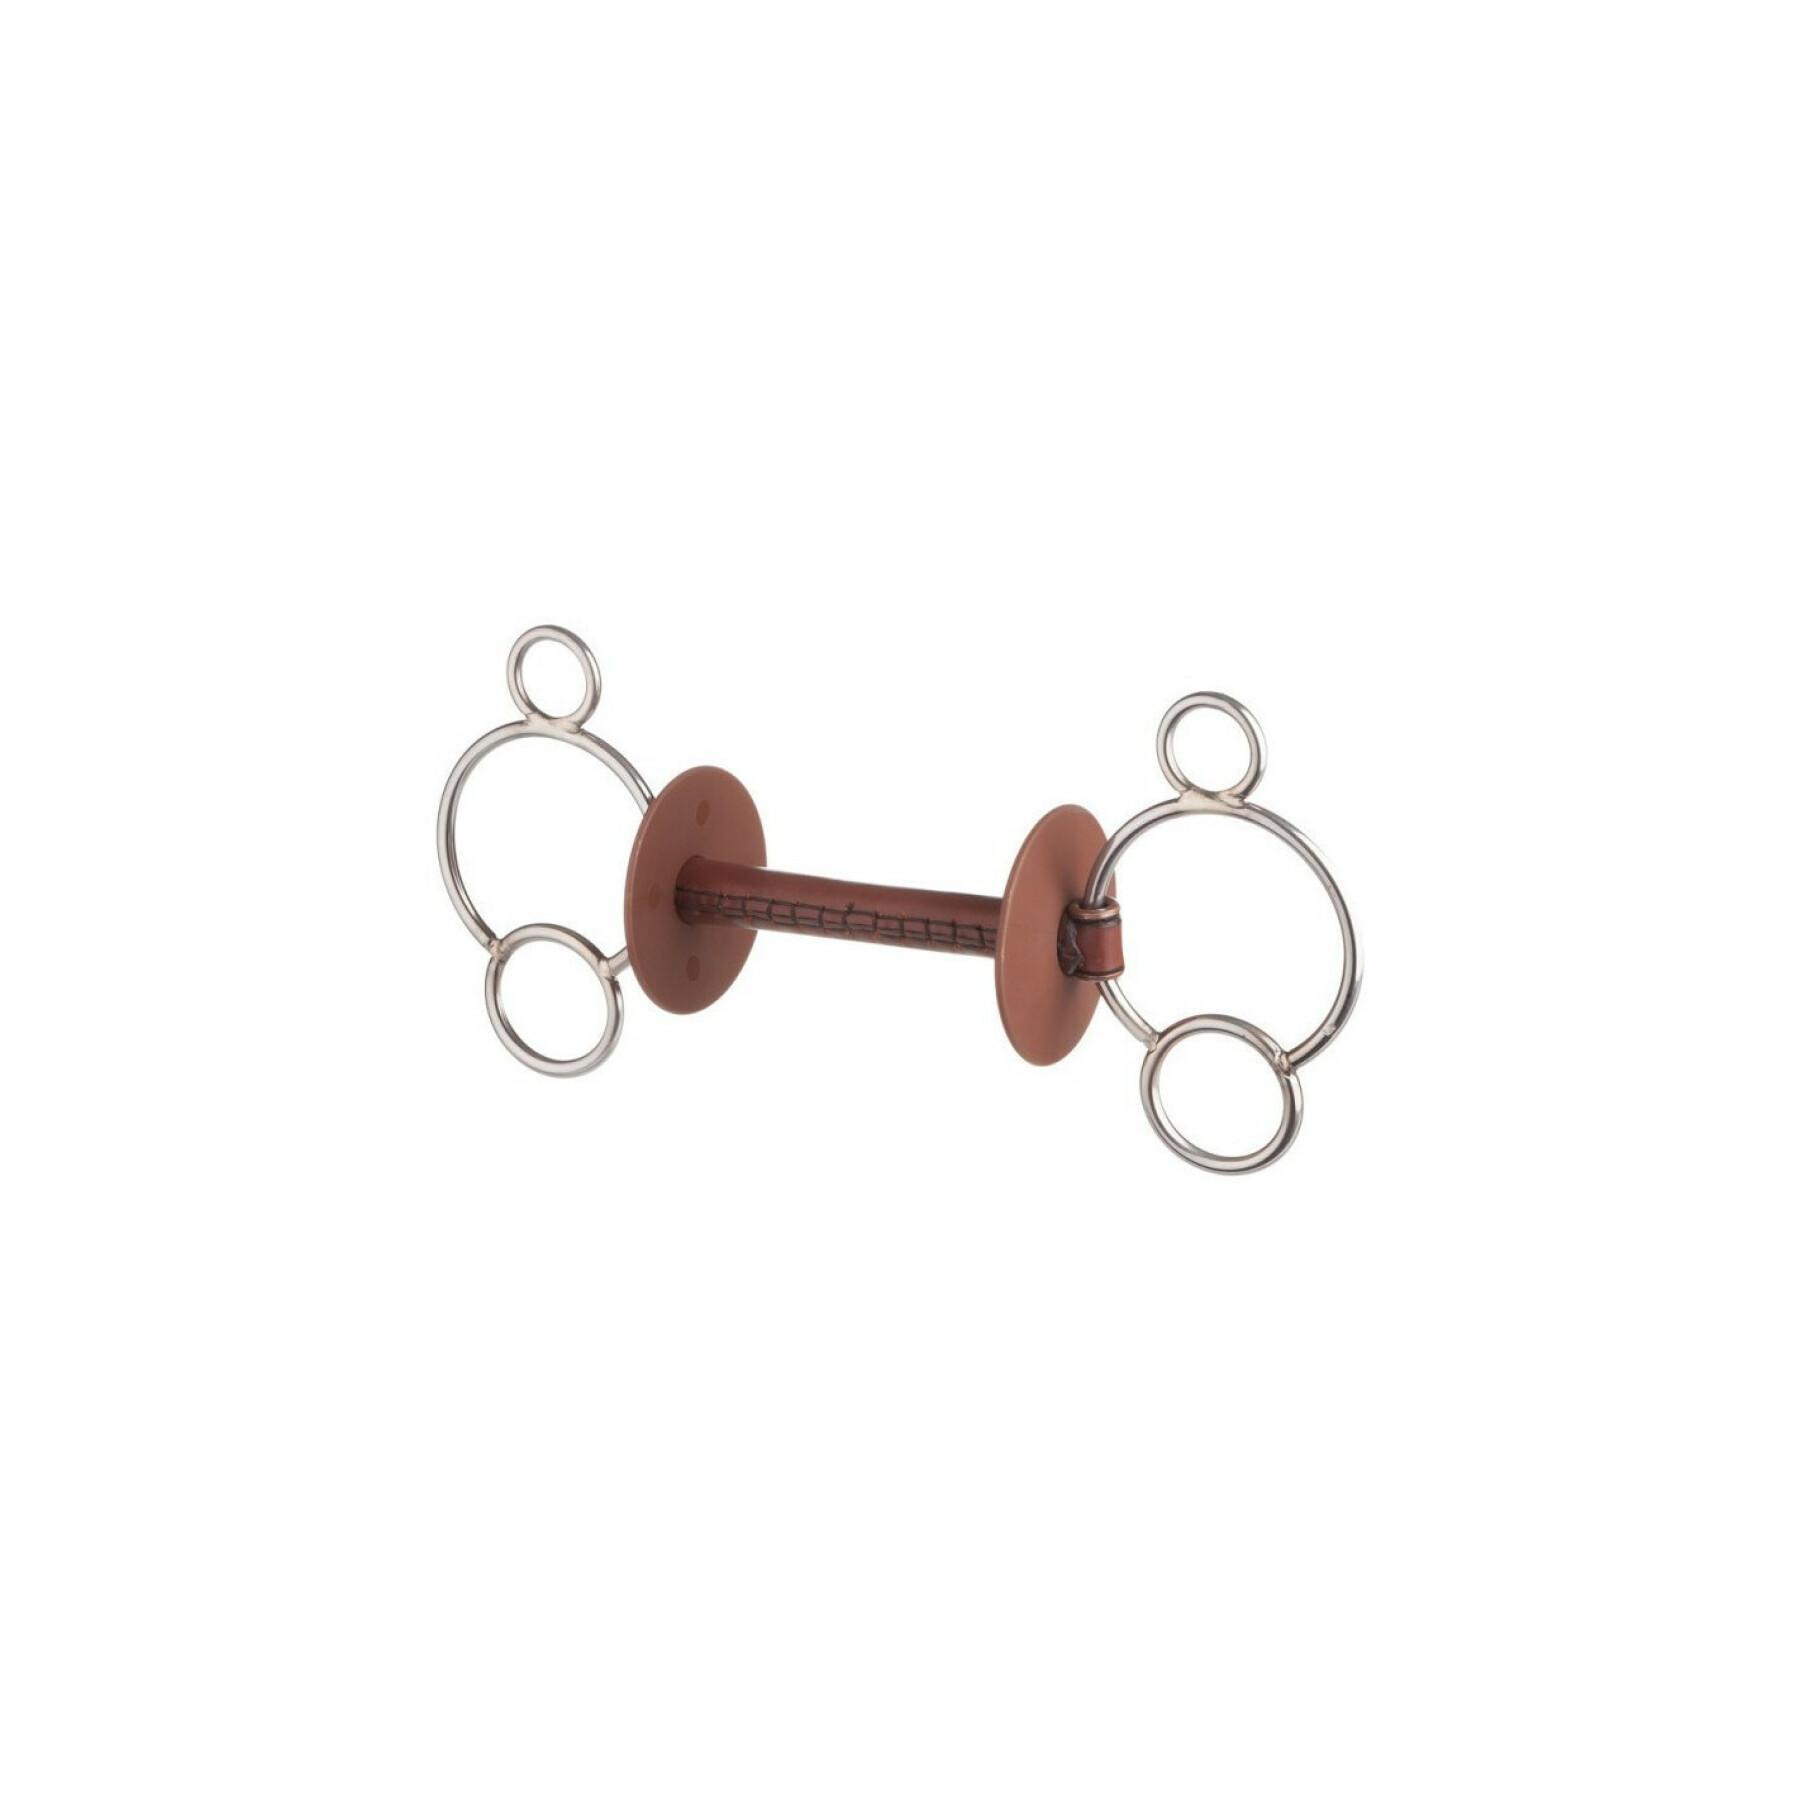 3 ring horse bit with standard leather bar Beris